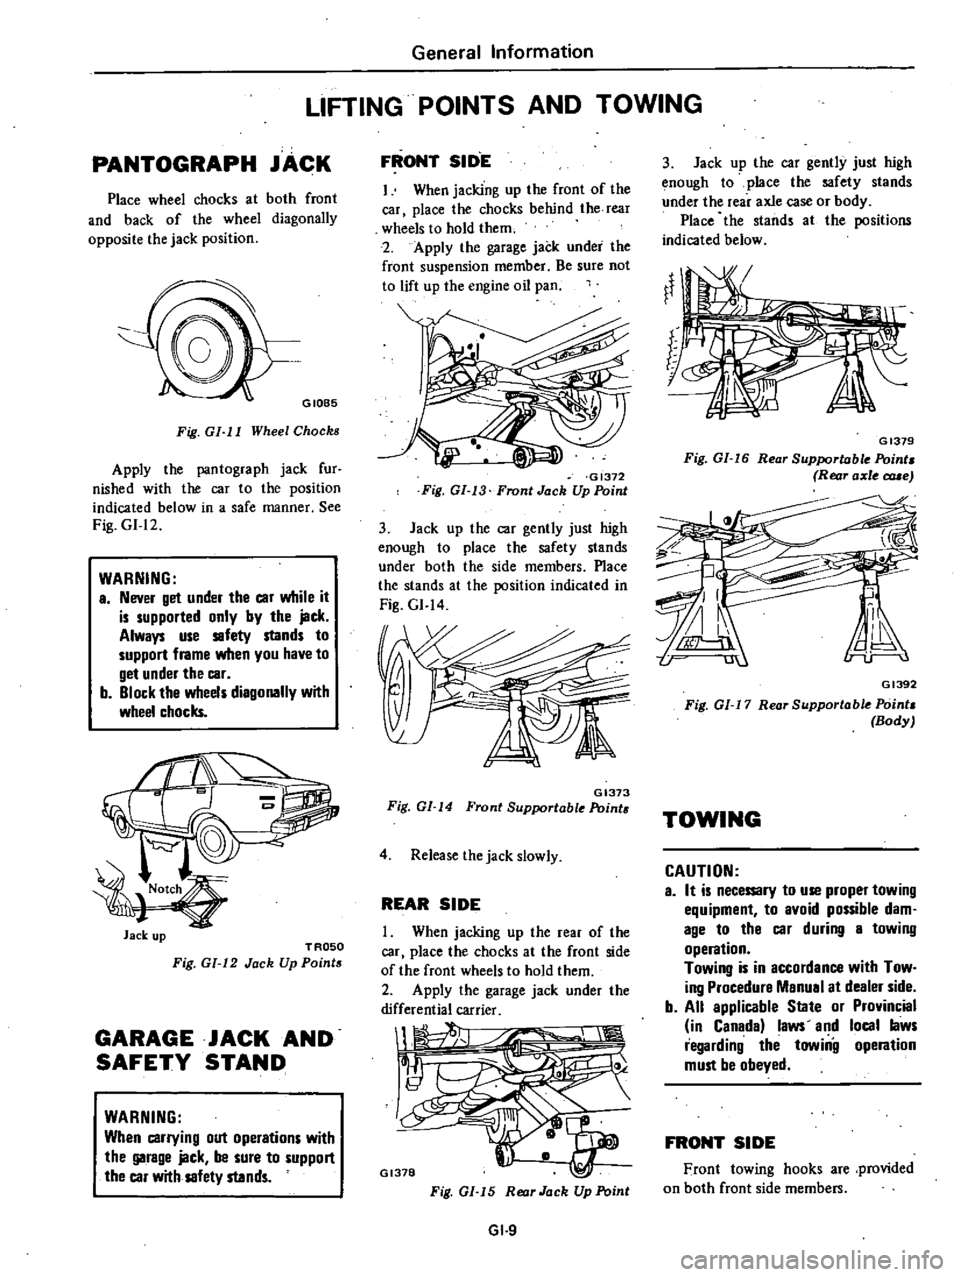 DATSUN 210 1979 User Guide 
General 
Information

LIFTING 
POINTS 
AND 
TOWING

PANTOGRAPH 
JACK

Place 
wheel 
chocks 
at 
both 
front

and

back 
of 
the 
wheel

diagonally

opposite 
the

jack 
position

GIOB5

Fig 
GI 
I 
I